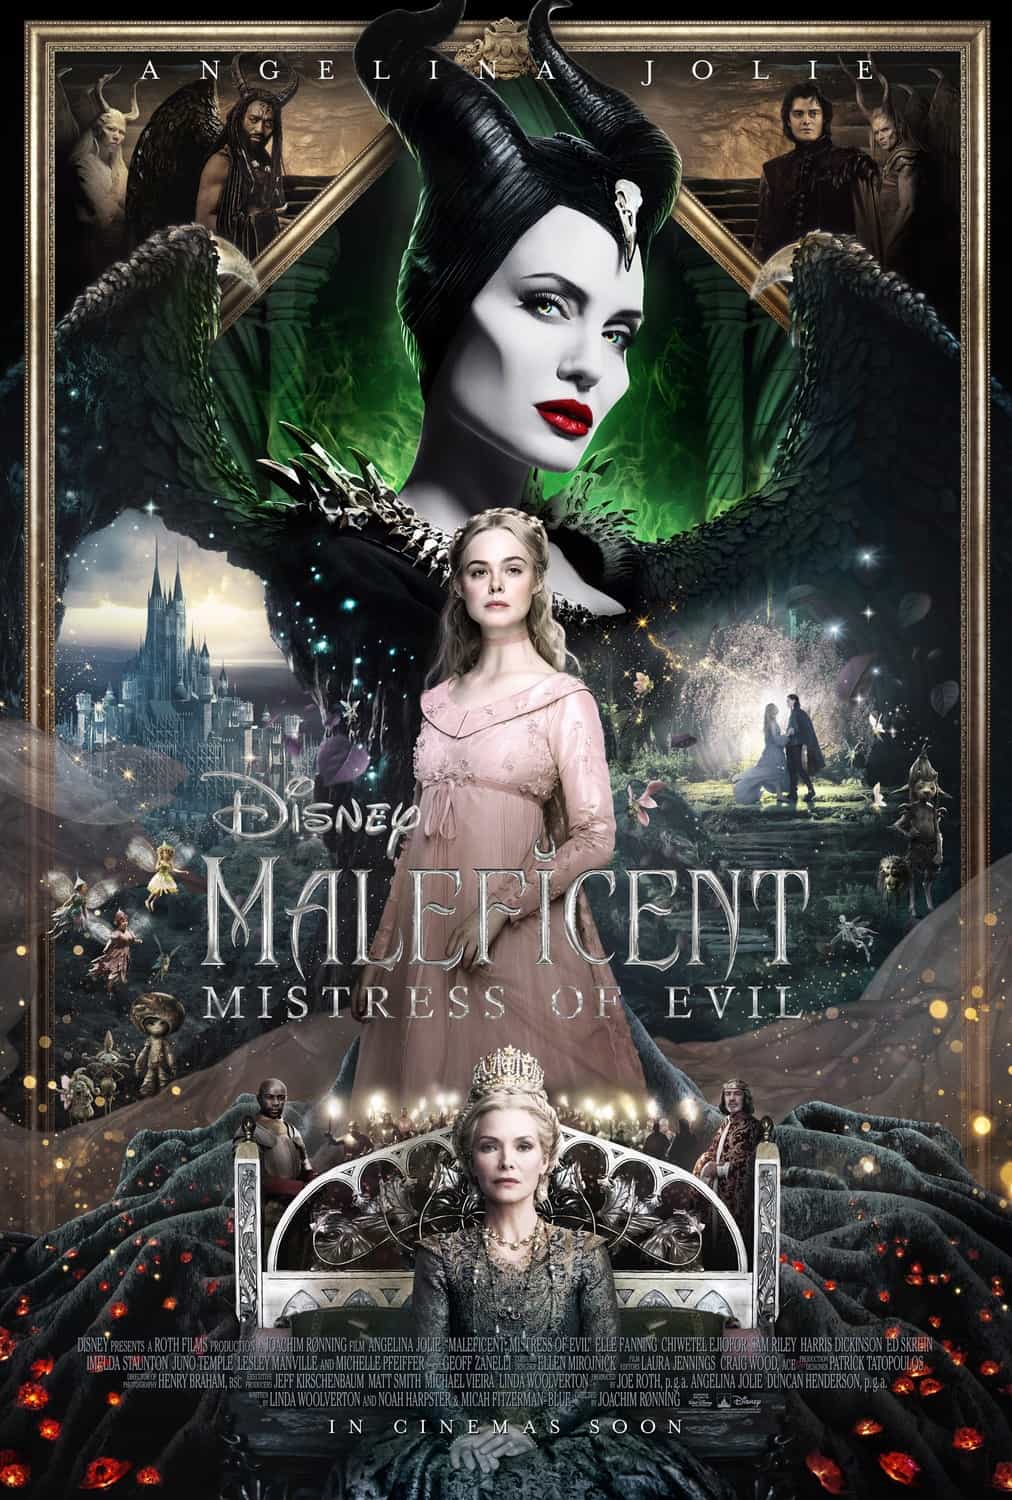 Maleficent: Mistress Of Evil is given a PG age rating in the UK for moderate fantasy threat, mild violence, scary scenes